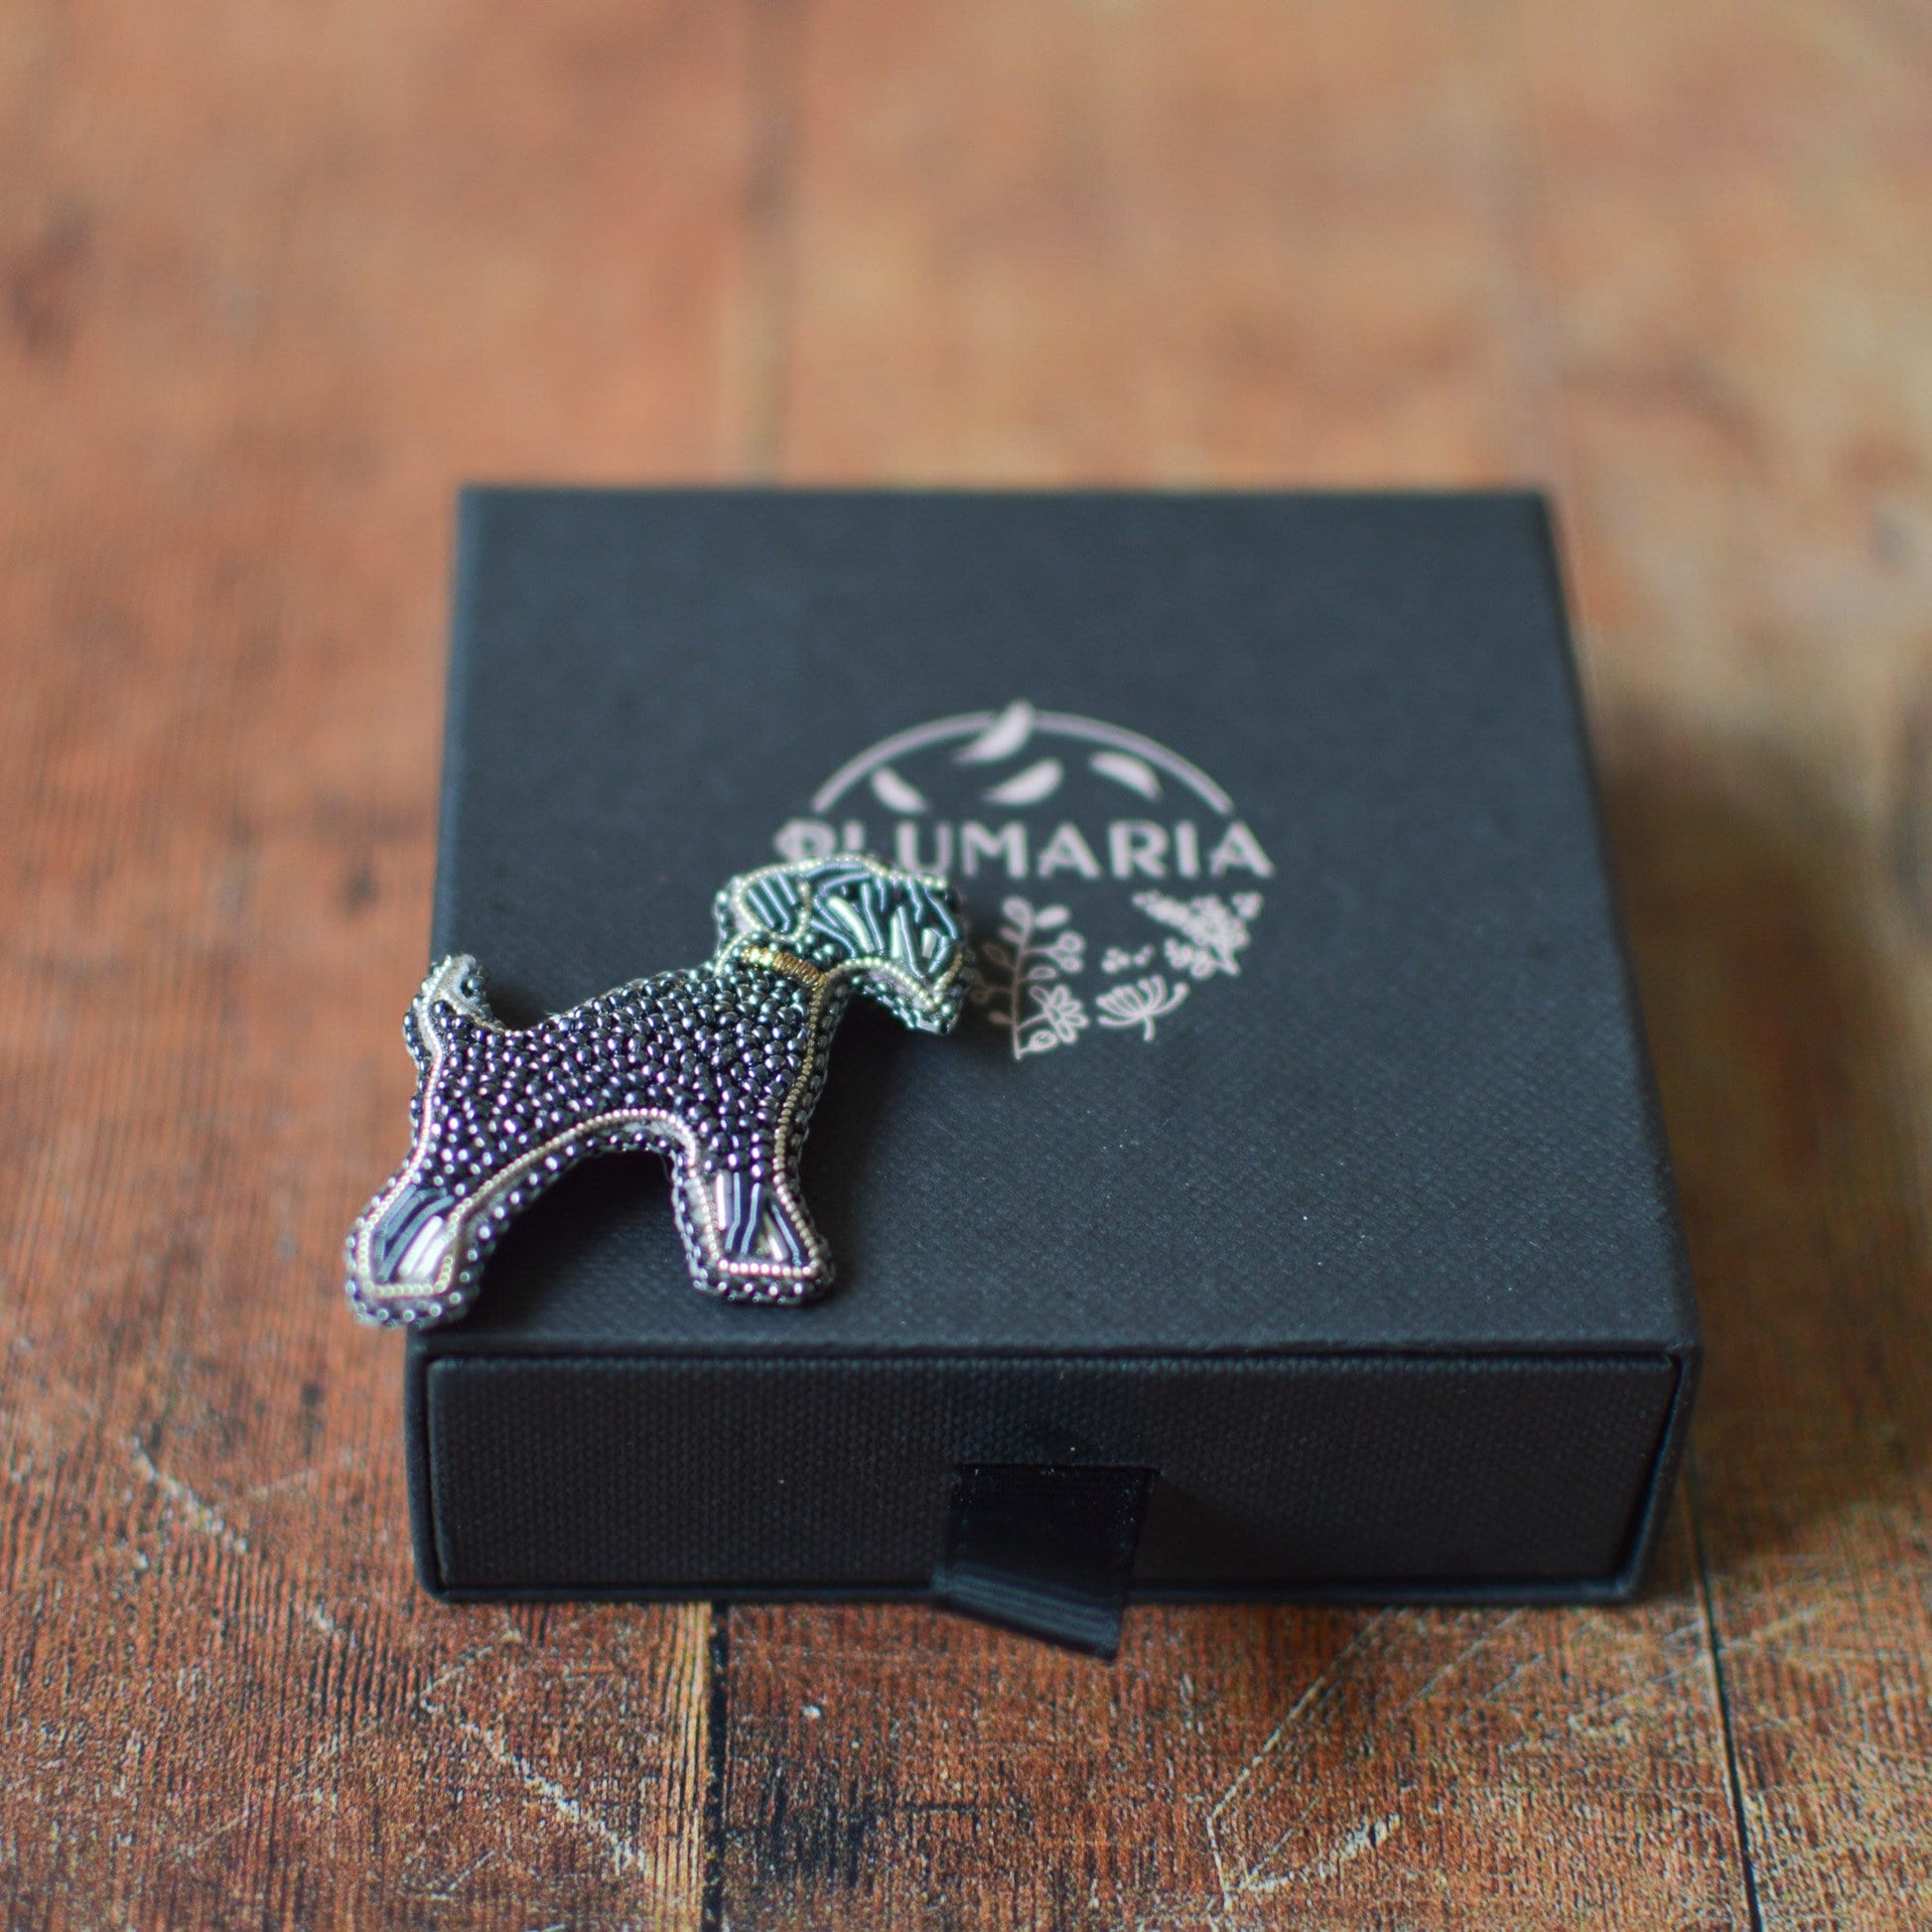 Black Schnauzer Brooch and Plumaria's packaging